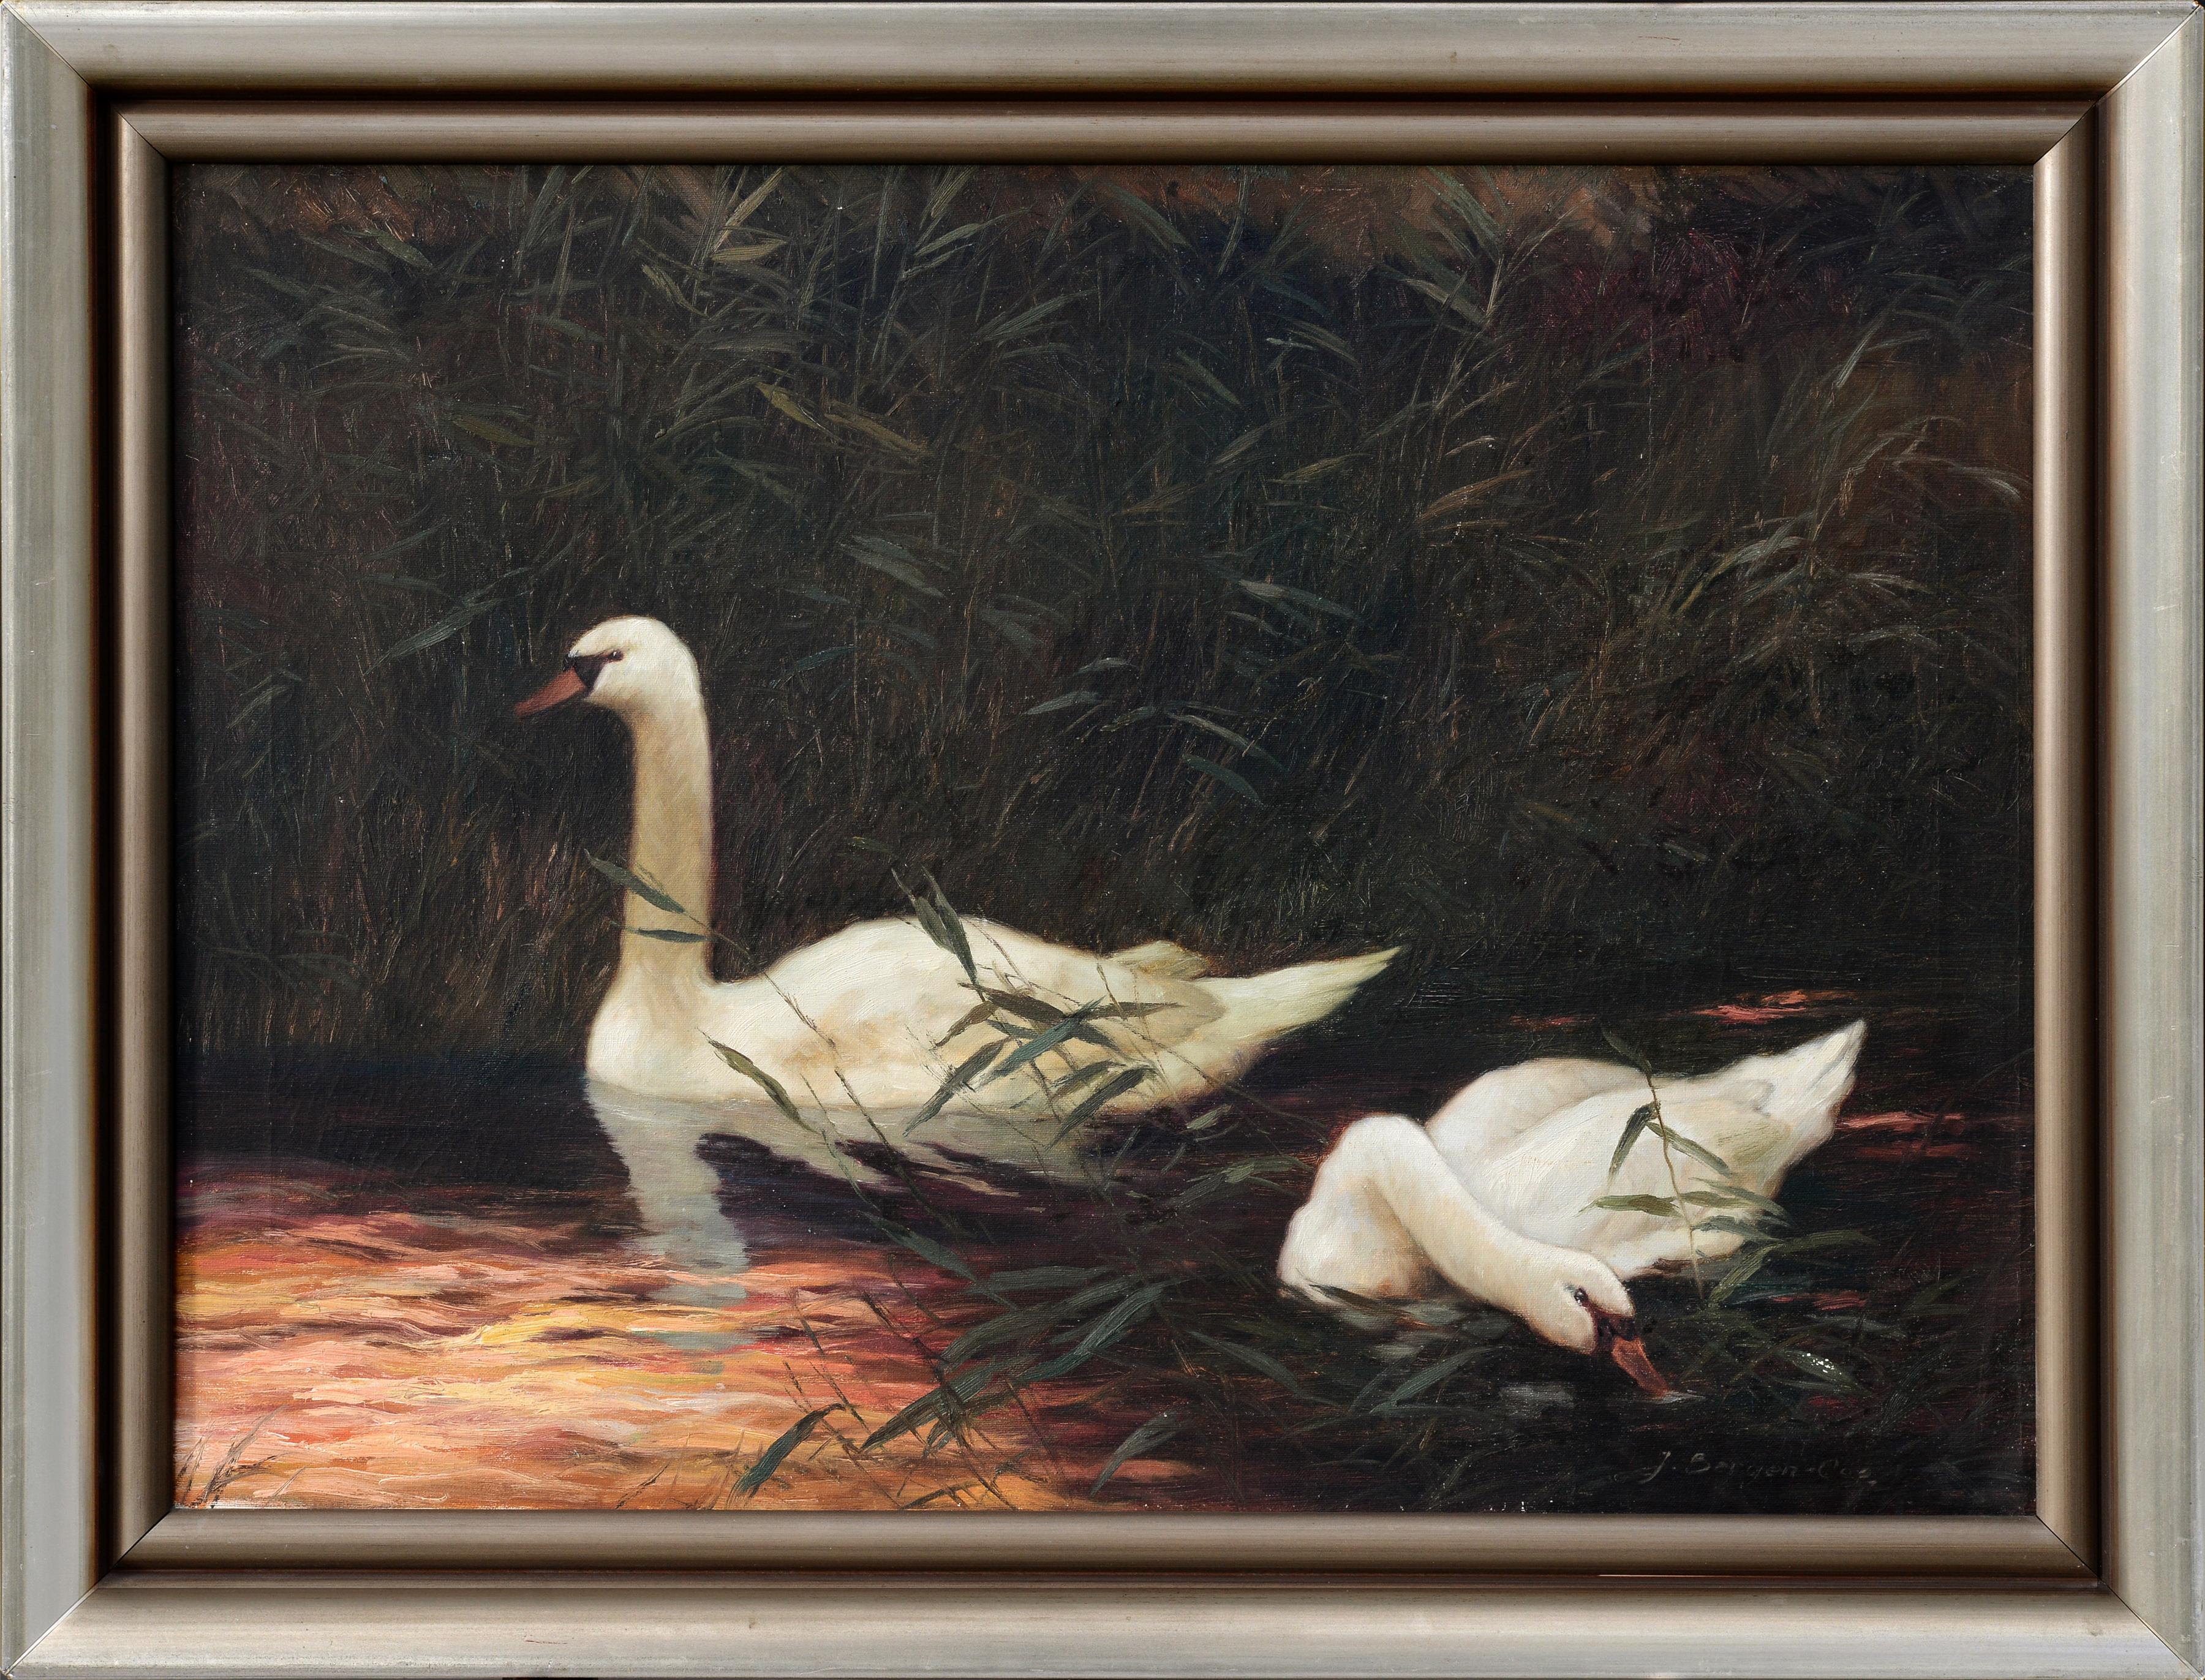 Pair of Snow White Swans at Sunset mid 20th century Vintage Oil Painting Signed